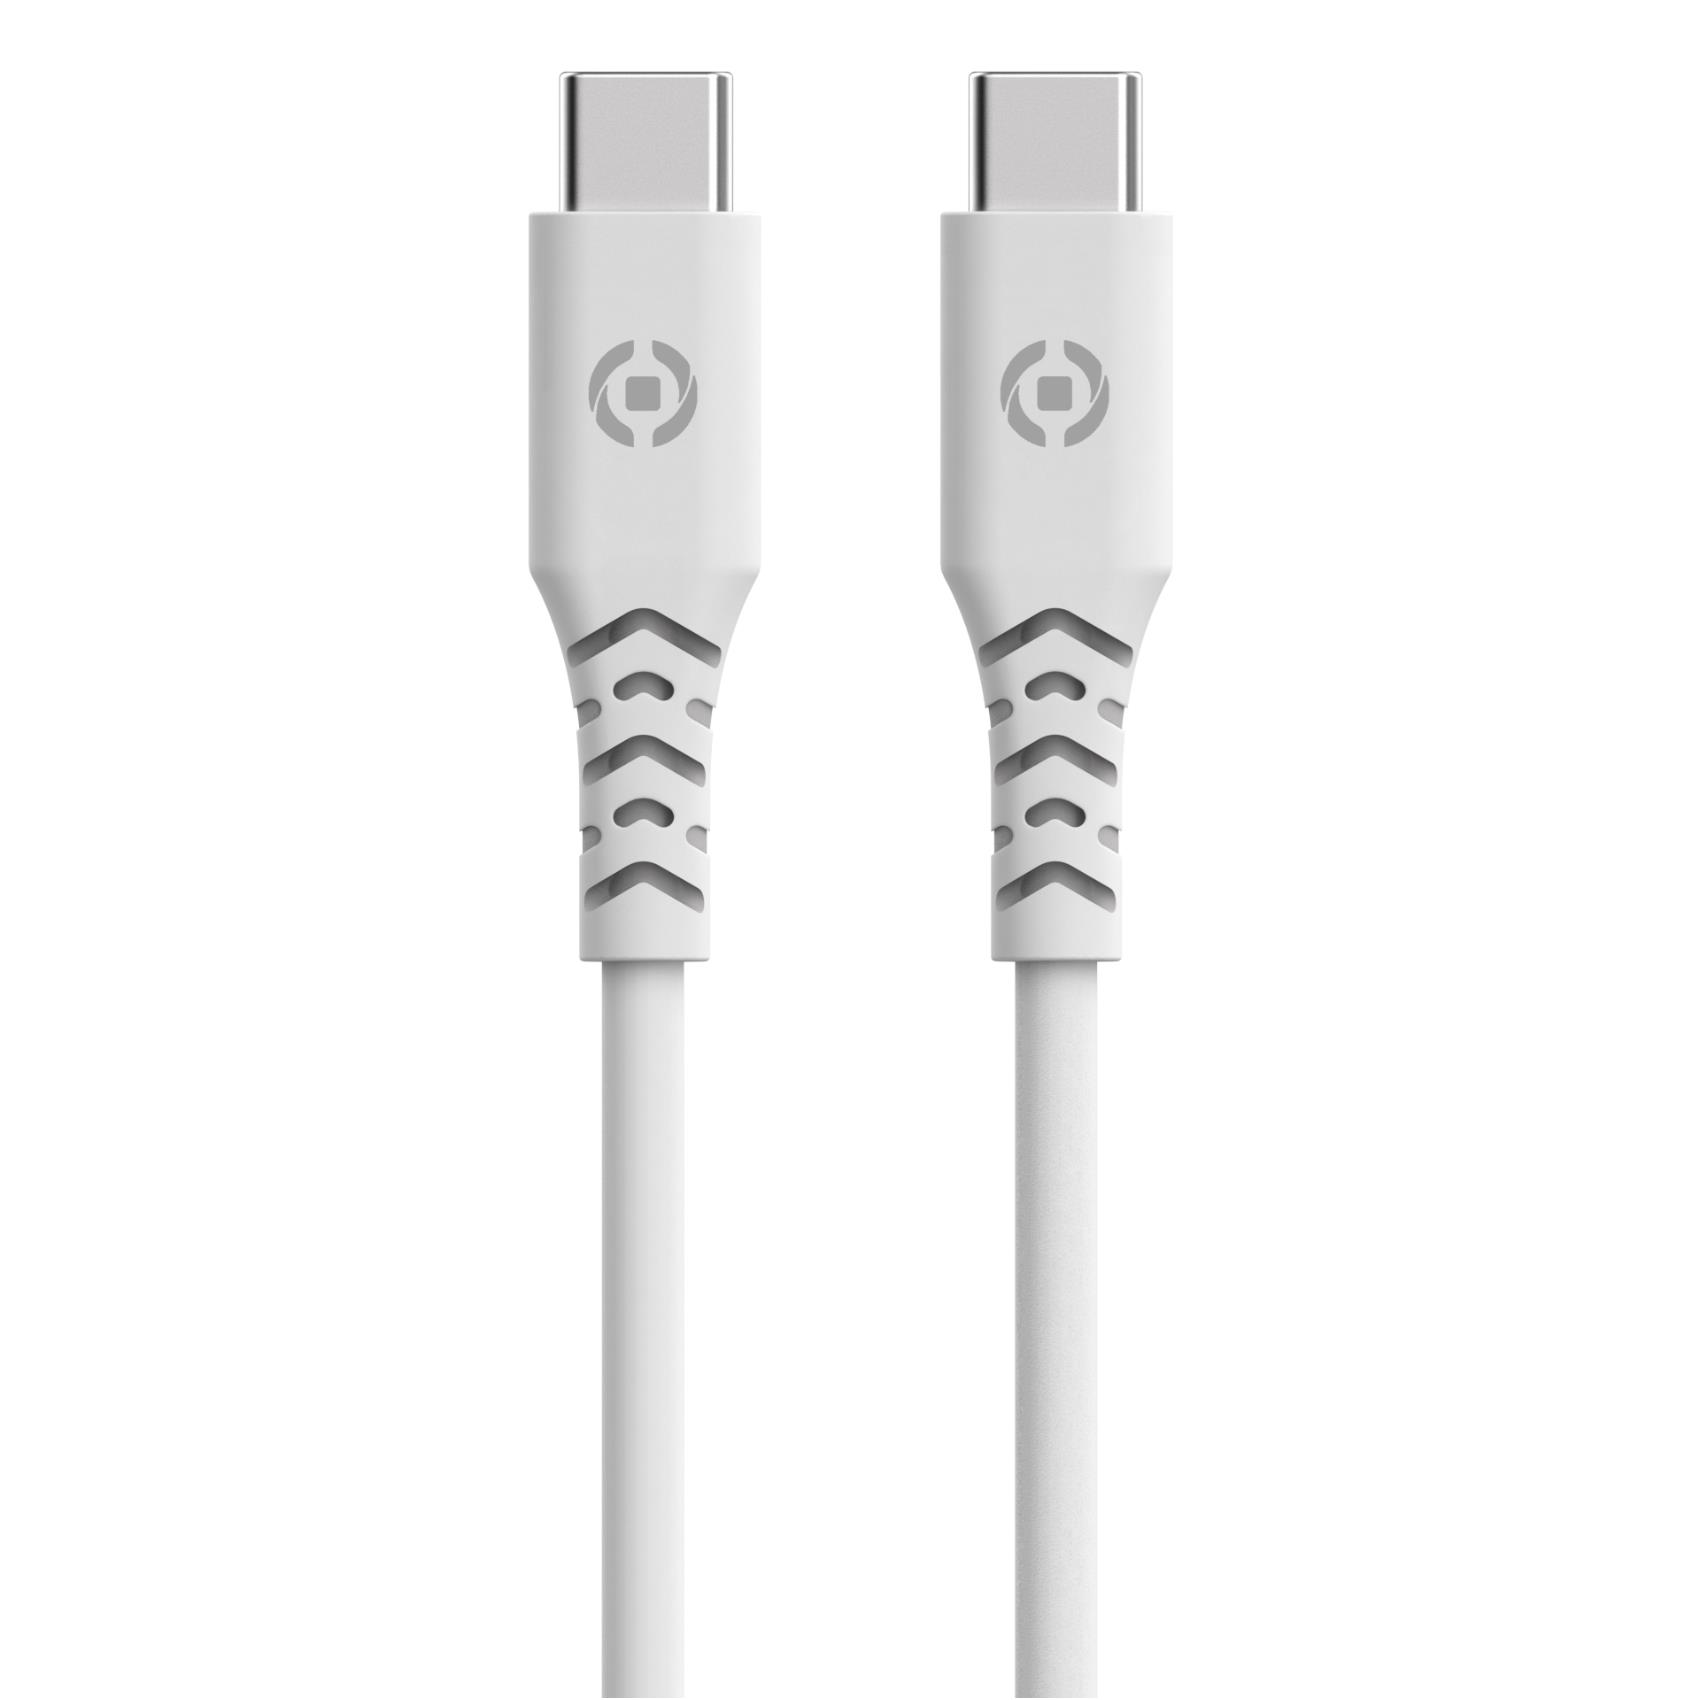 GRSUSBCUSBC - USB-C to USB-C Cable - 100% Recycled Plastic [PLANET COLLECTION]